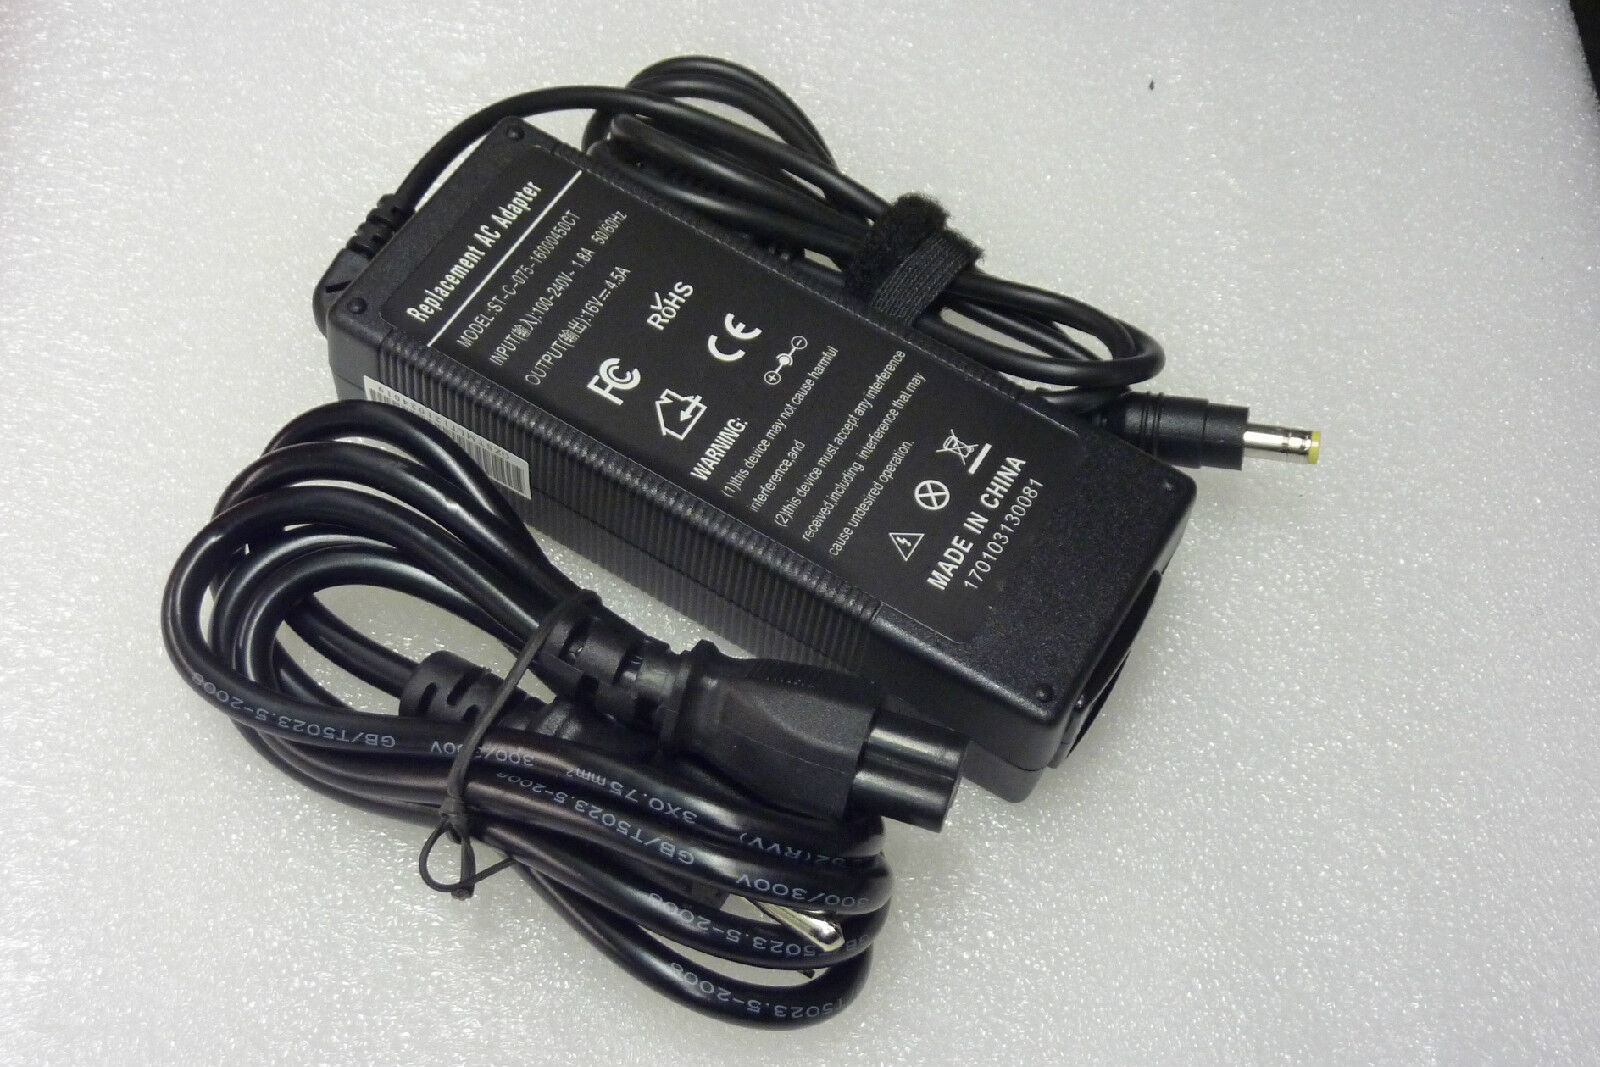 AC Adapter Power Cord Battery Charger For IBM Thinkpad R50e Type 1834 1842 2670